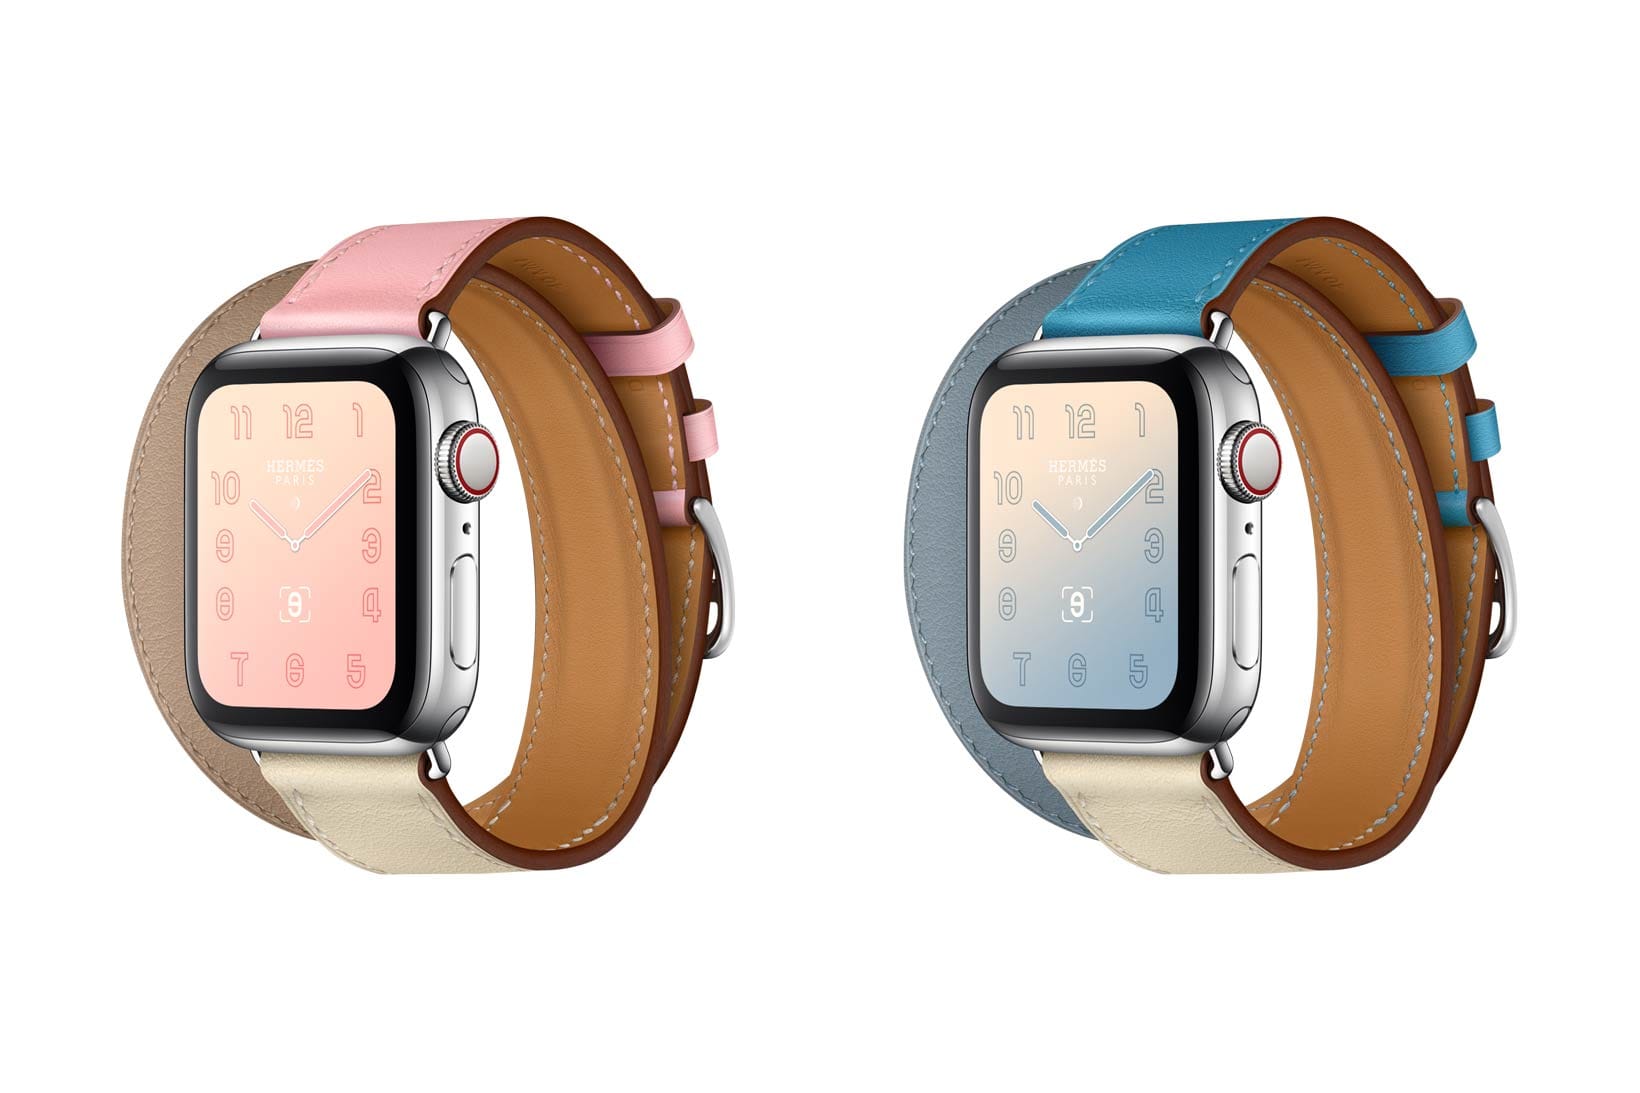 Apple Watch Bands From Nike and Hermes 